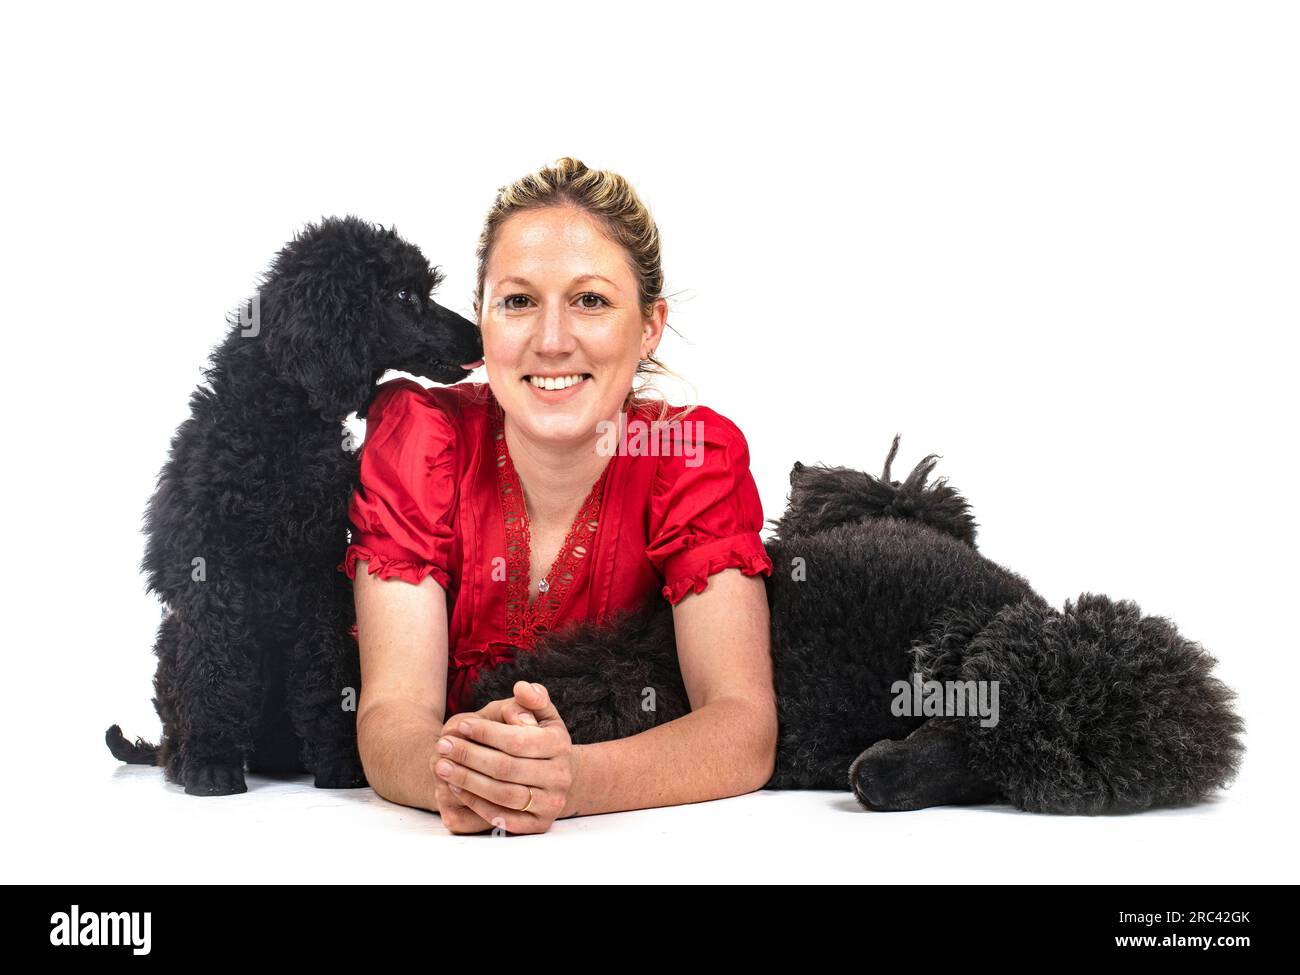 standard black poodles and woman in front of white background Stock Photo